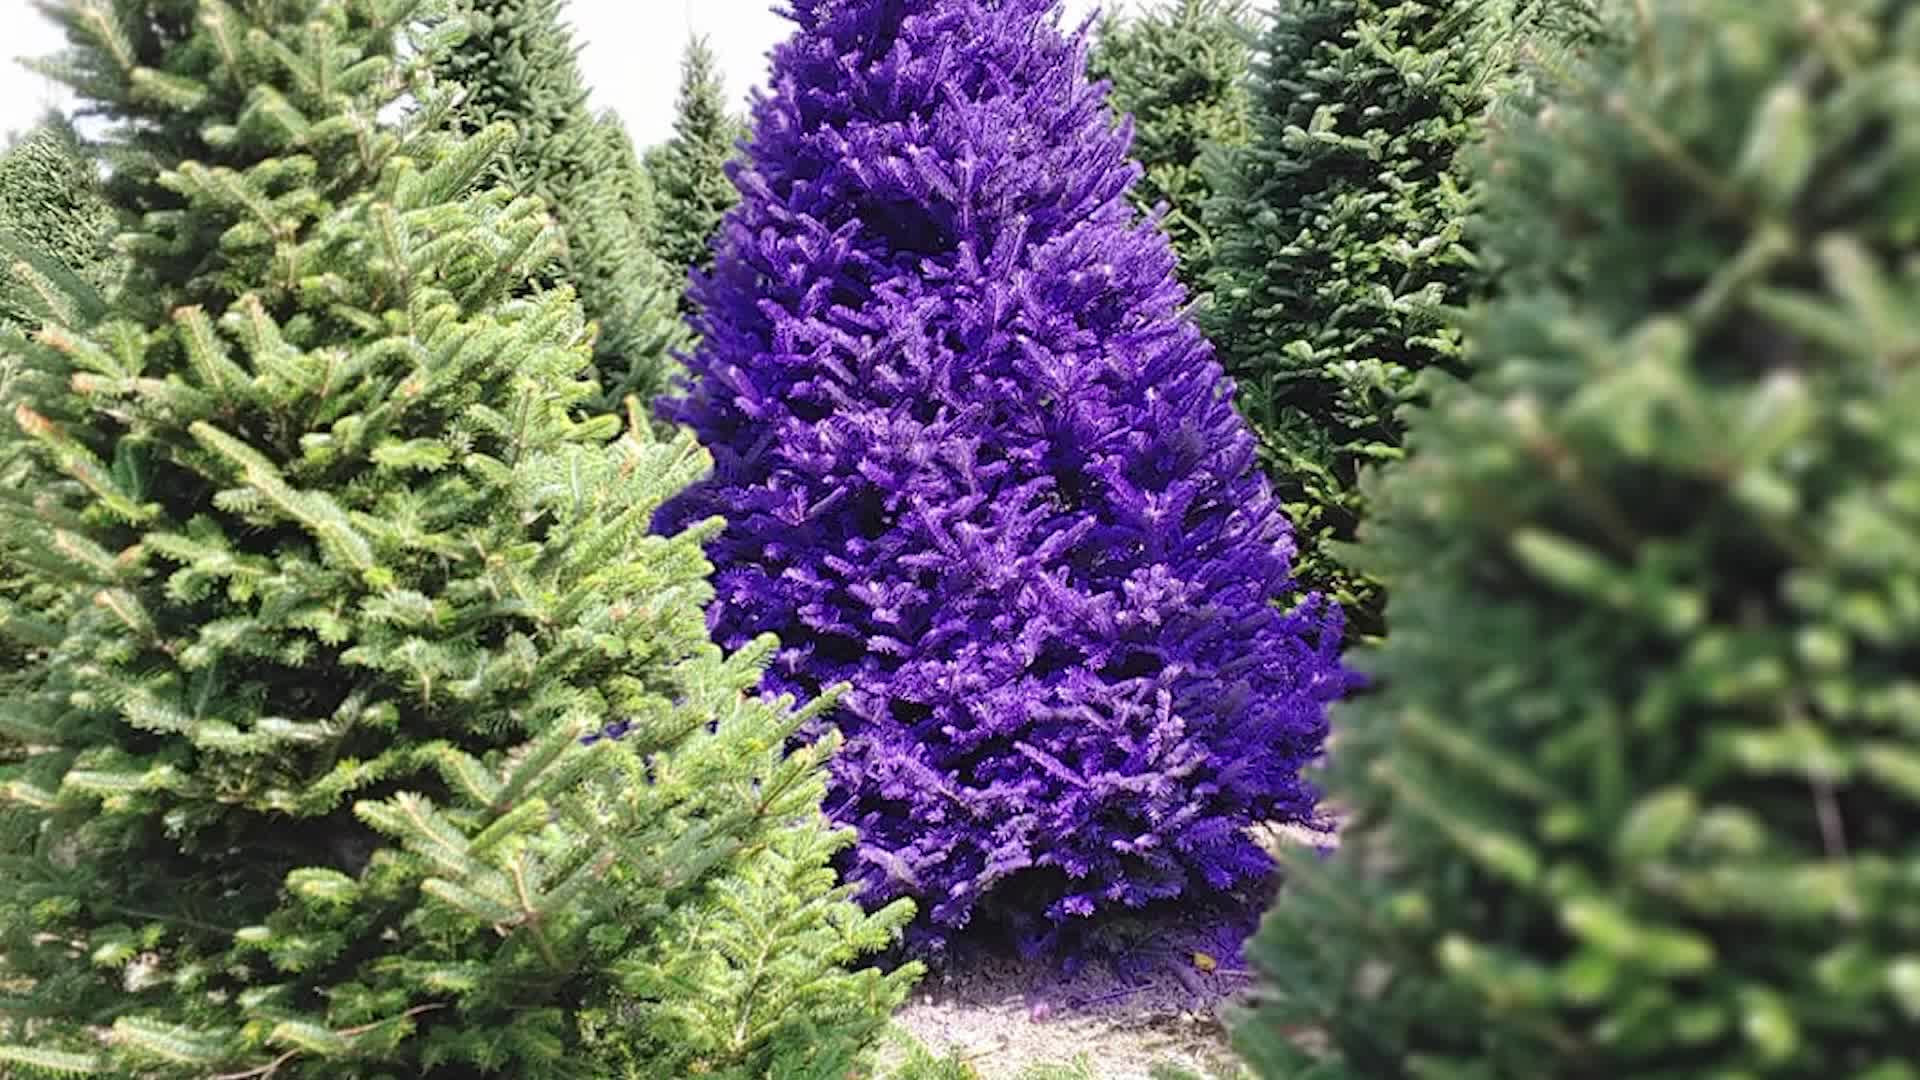 For Those Who Like The Non Traditional: A Purple Christmas Tree From The Weather Channel